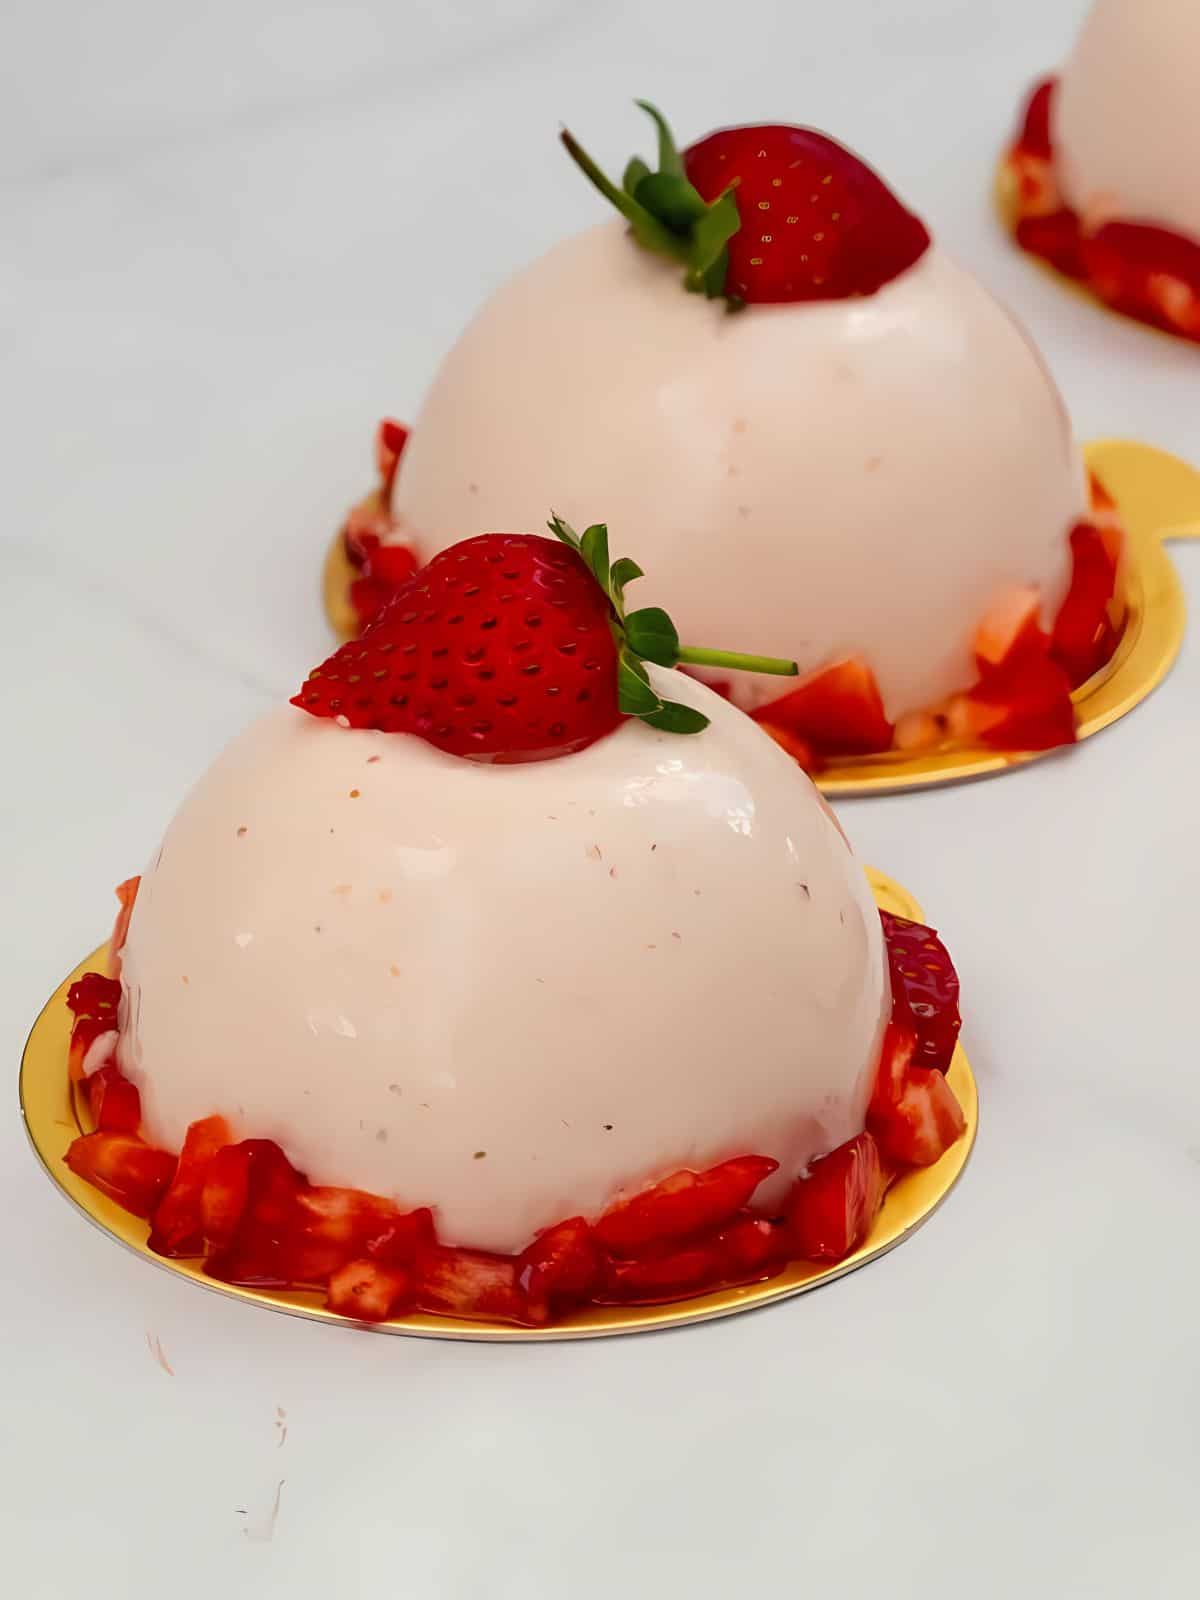 Strawberry mousse dome topped with strawberries, surrounded by small strawberry slices.